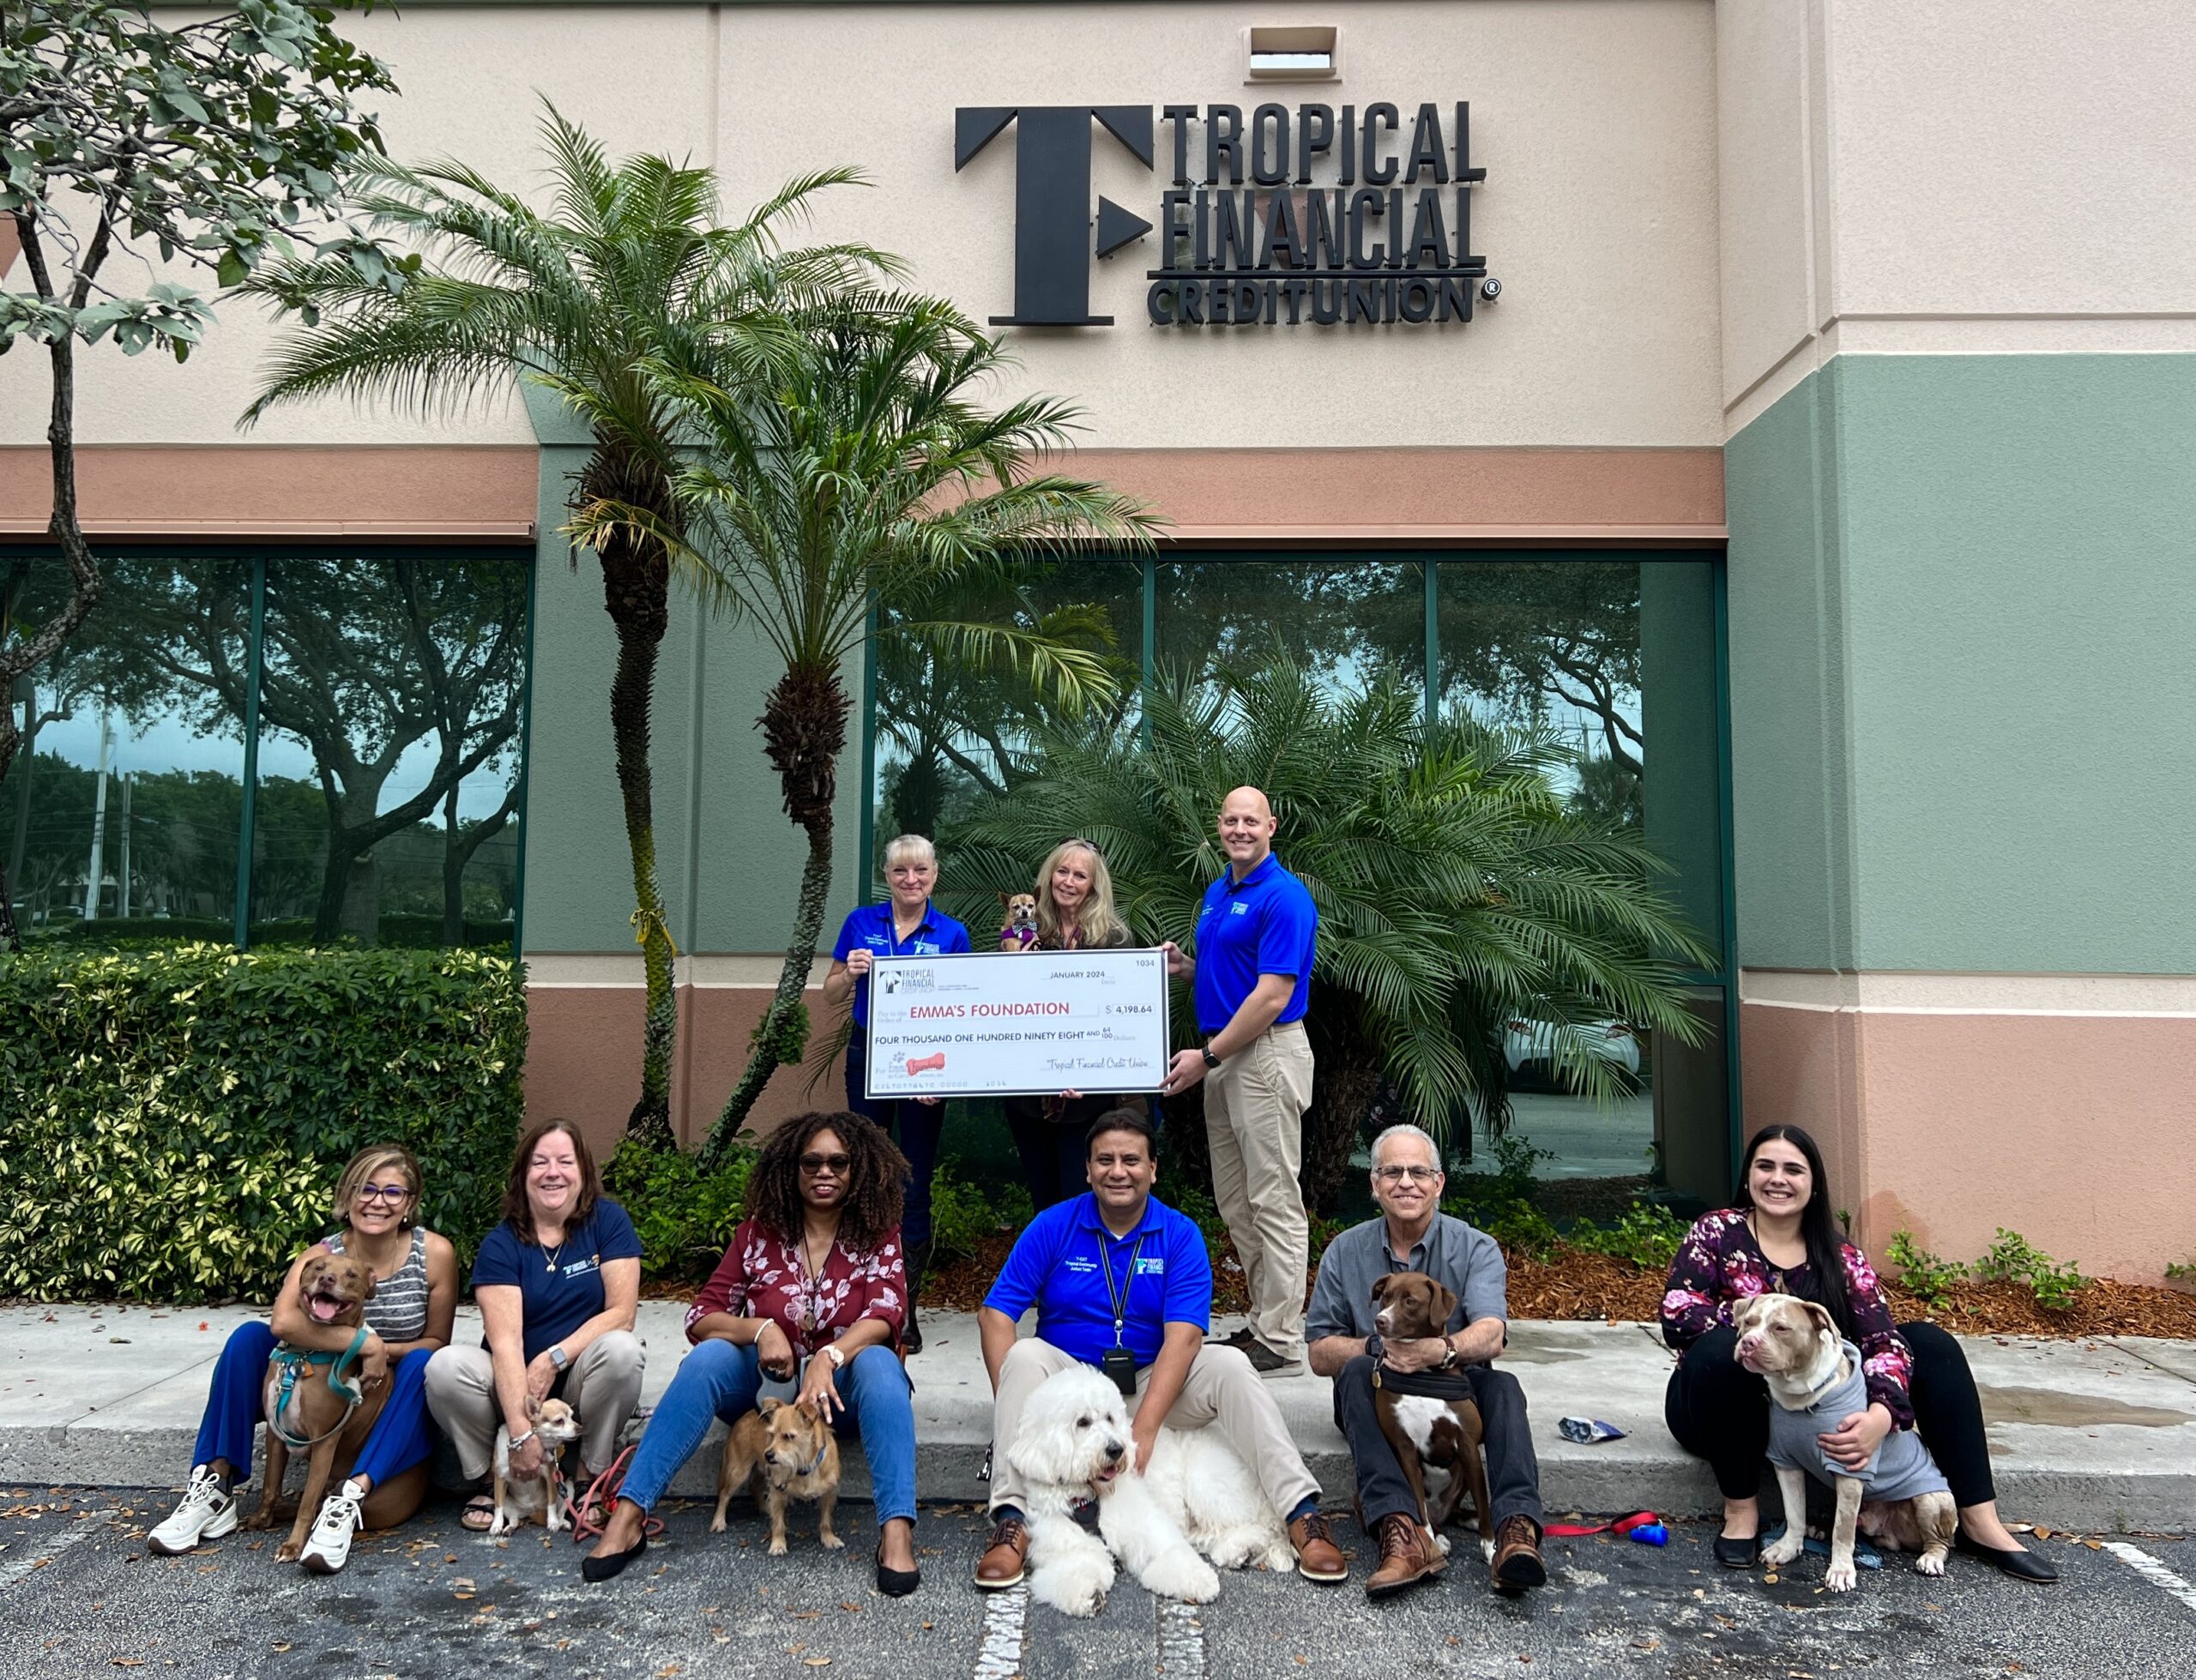 Tropical Financial Credit Union Raises Money for Emma’s Foundation for Canine Cancer